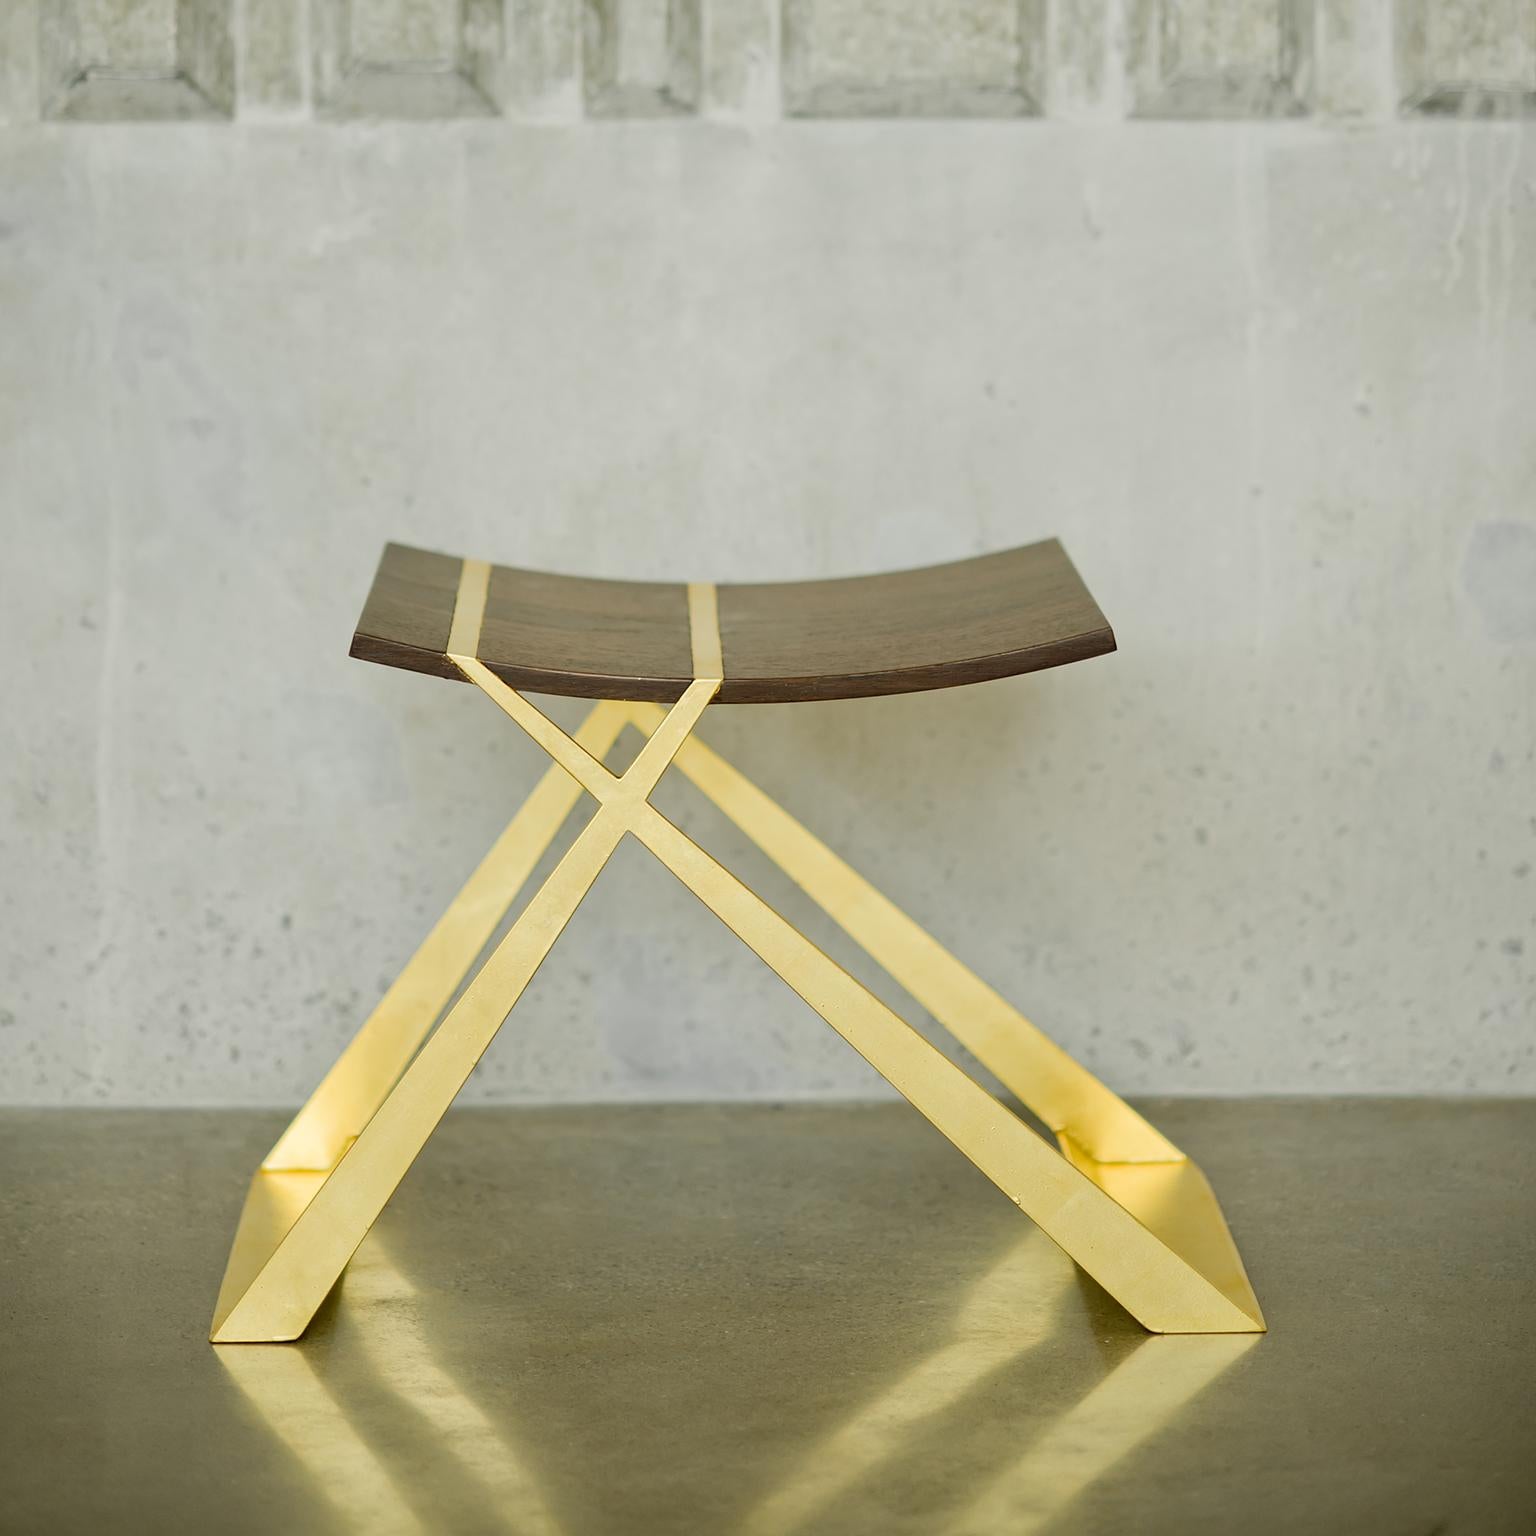 Veneer Wooster Stool, in Walnut and Gold Leaf, by Dean and Dahl